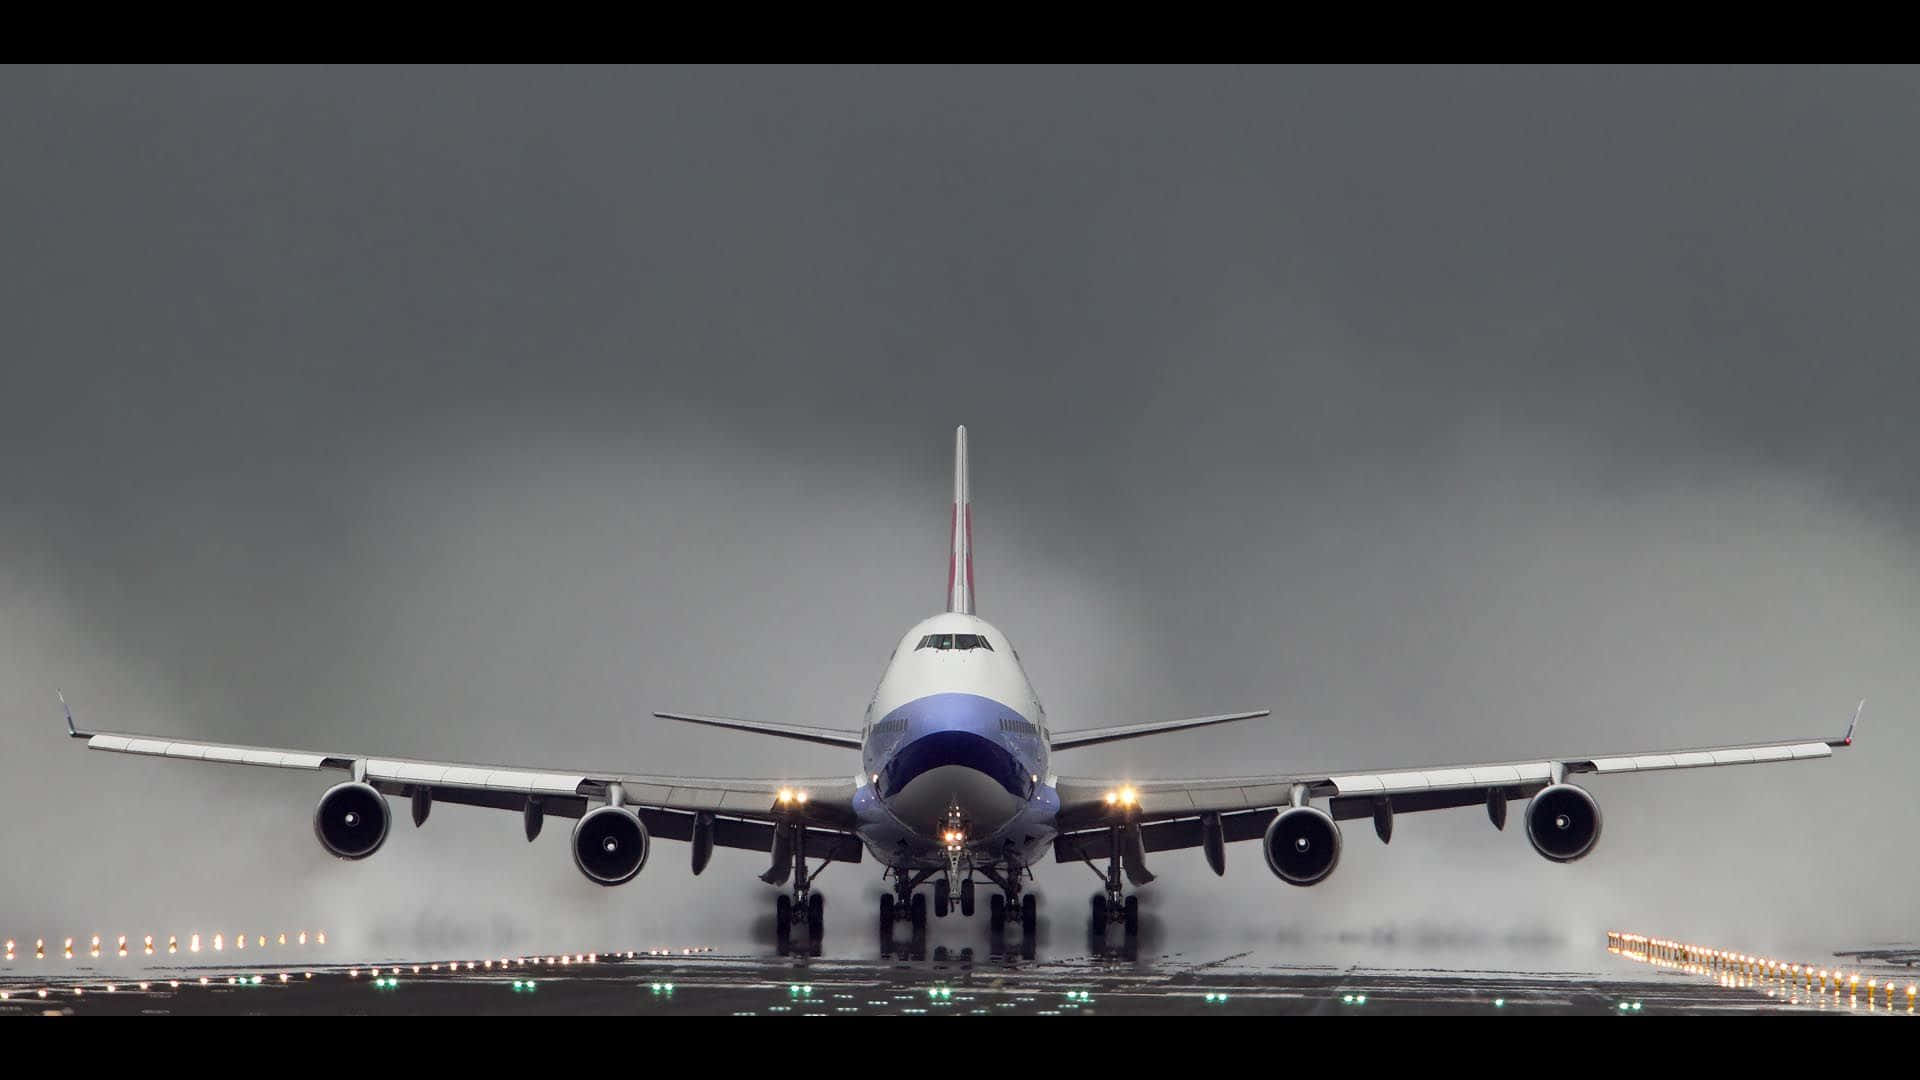 747 Airplane Taking Off Background